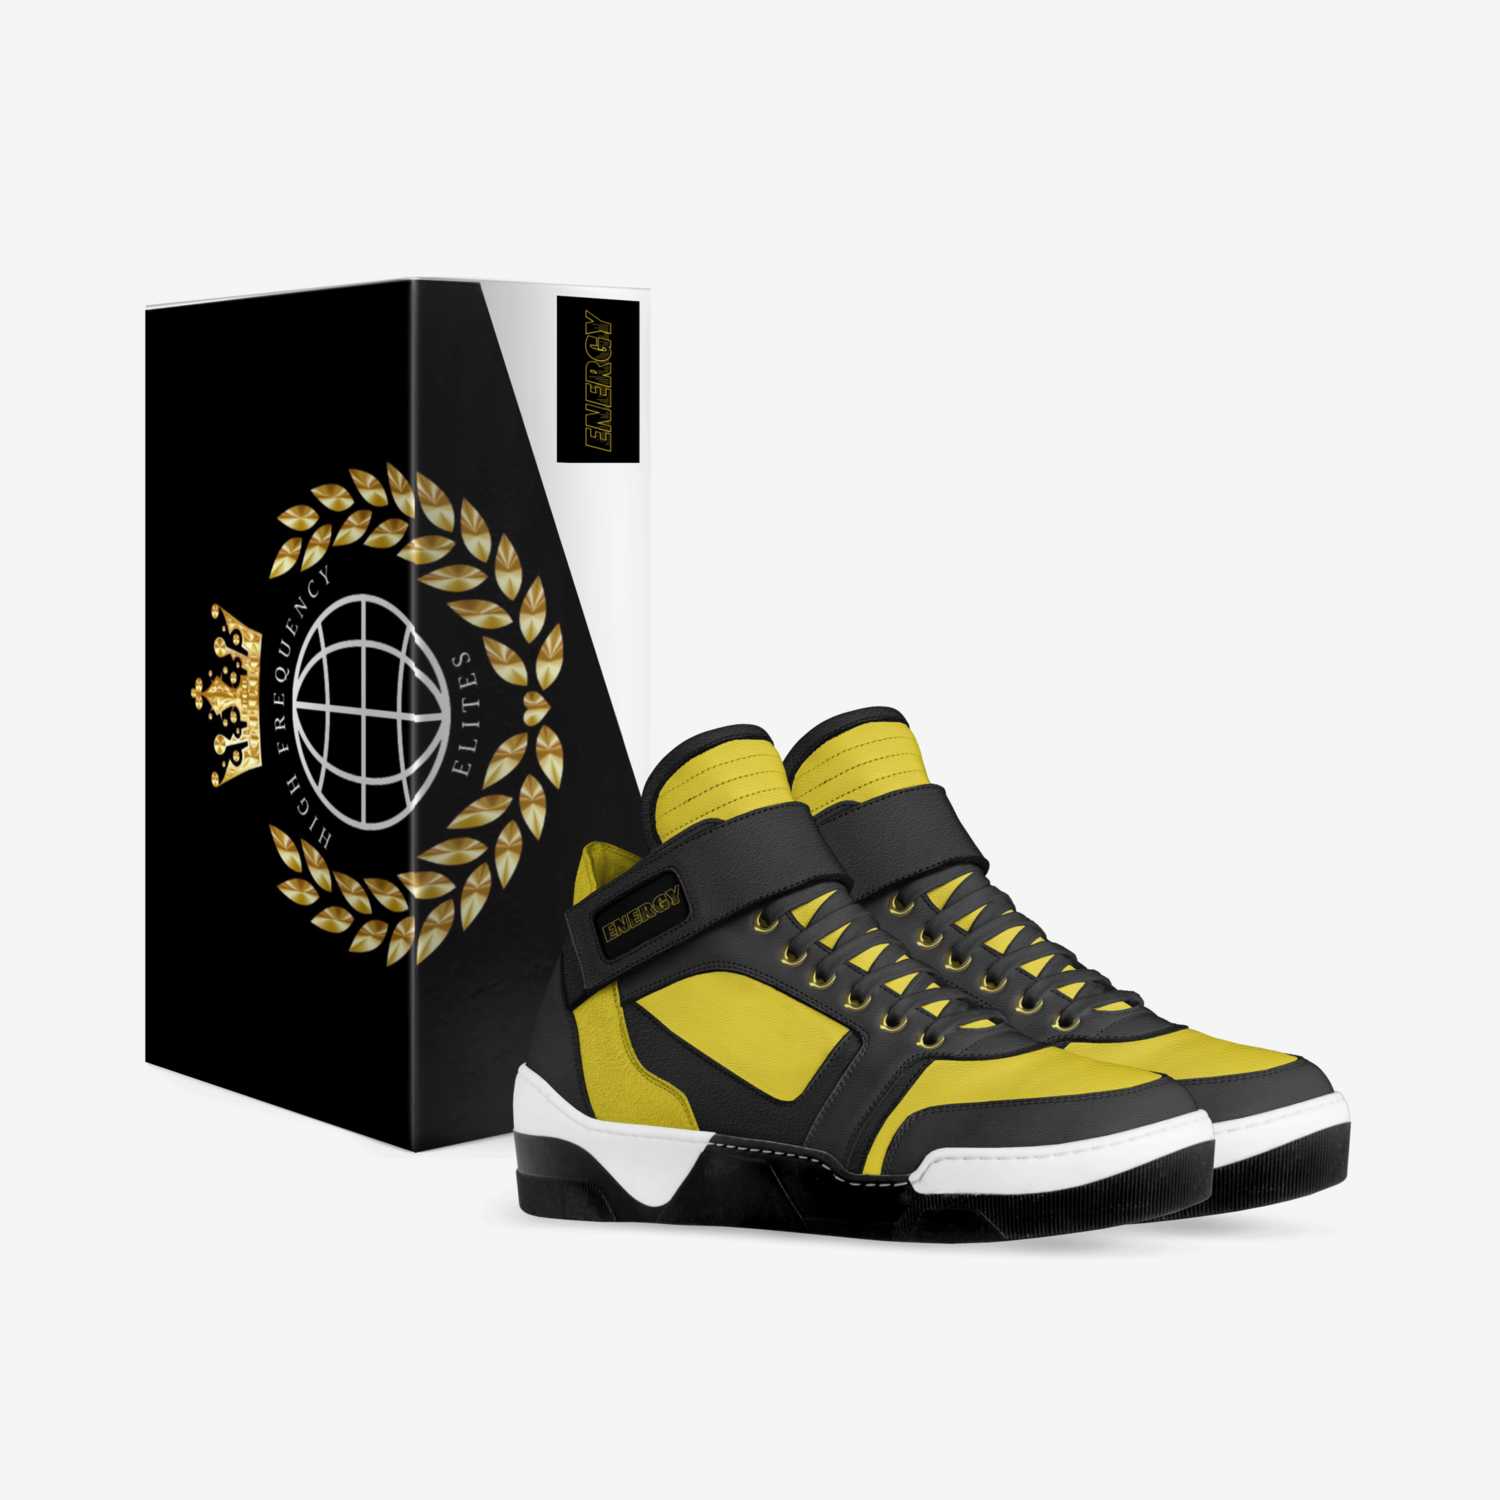 Energy Excellence custom made in Italy shoes by Walter Scott | Box view